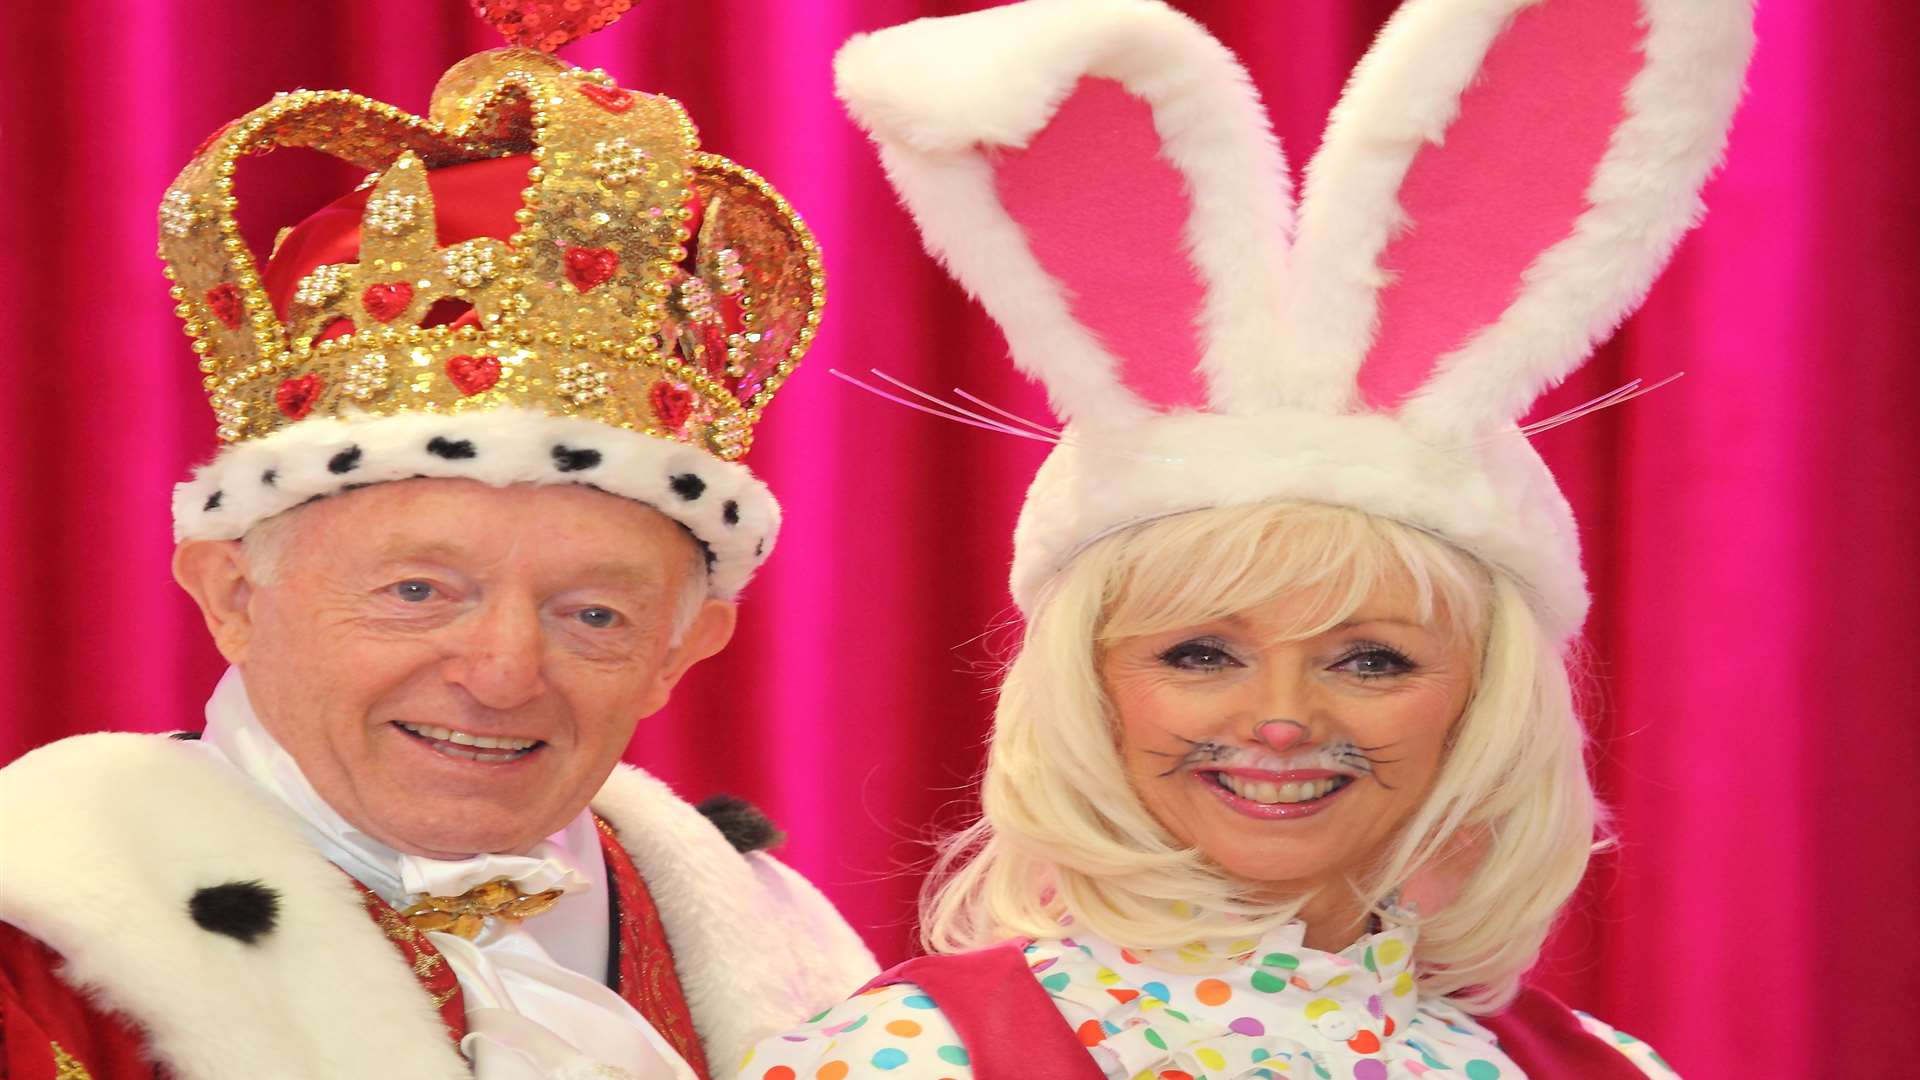 Paul Daniels and Debbie McGee are among the acts who have appeared there.